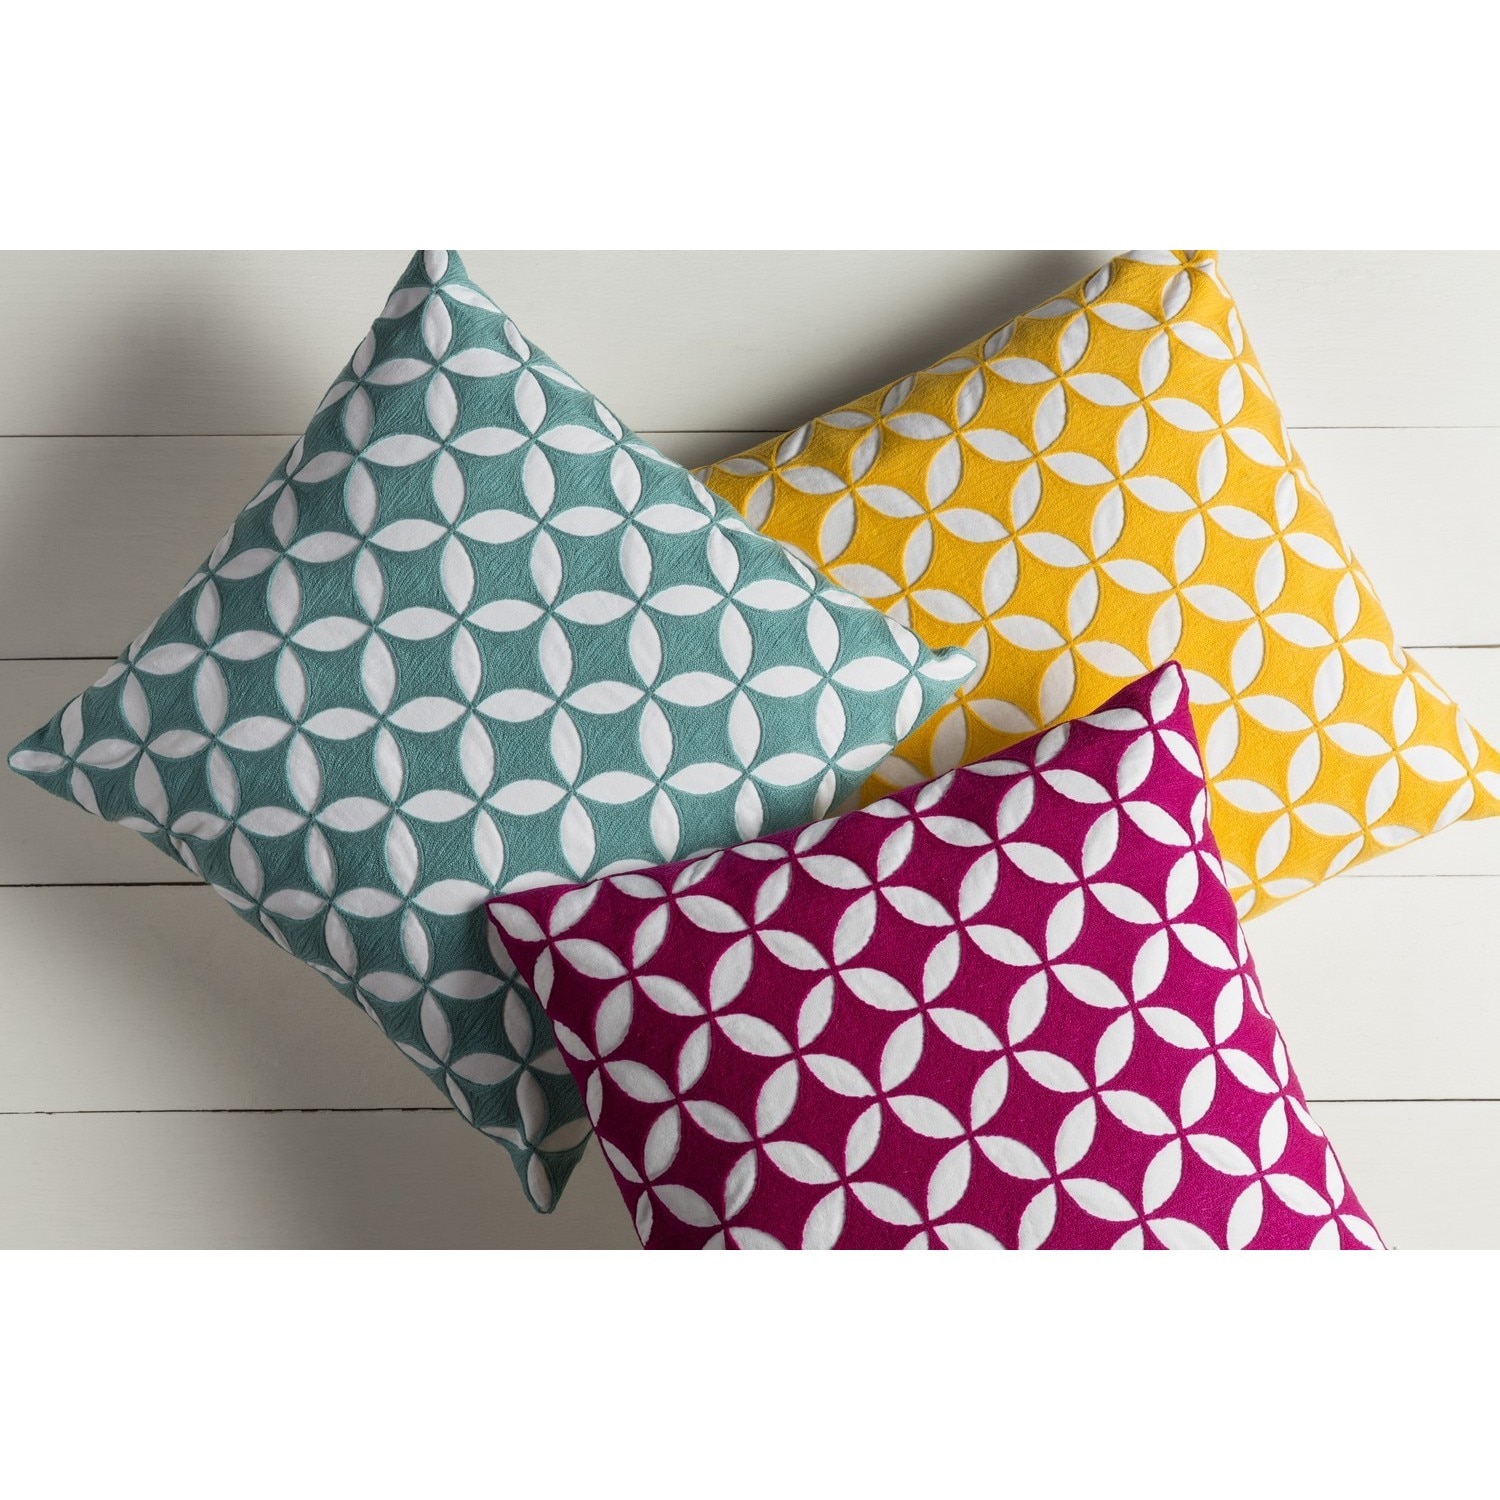 18 Inch Square Pillow by Blu Dot at